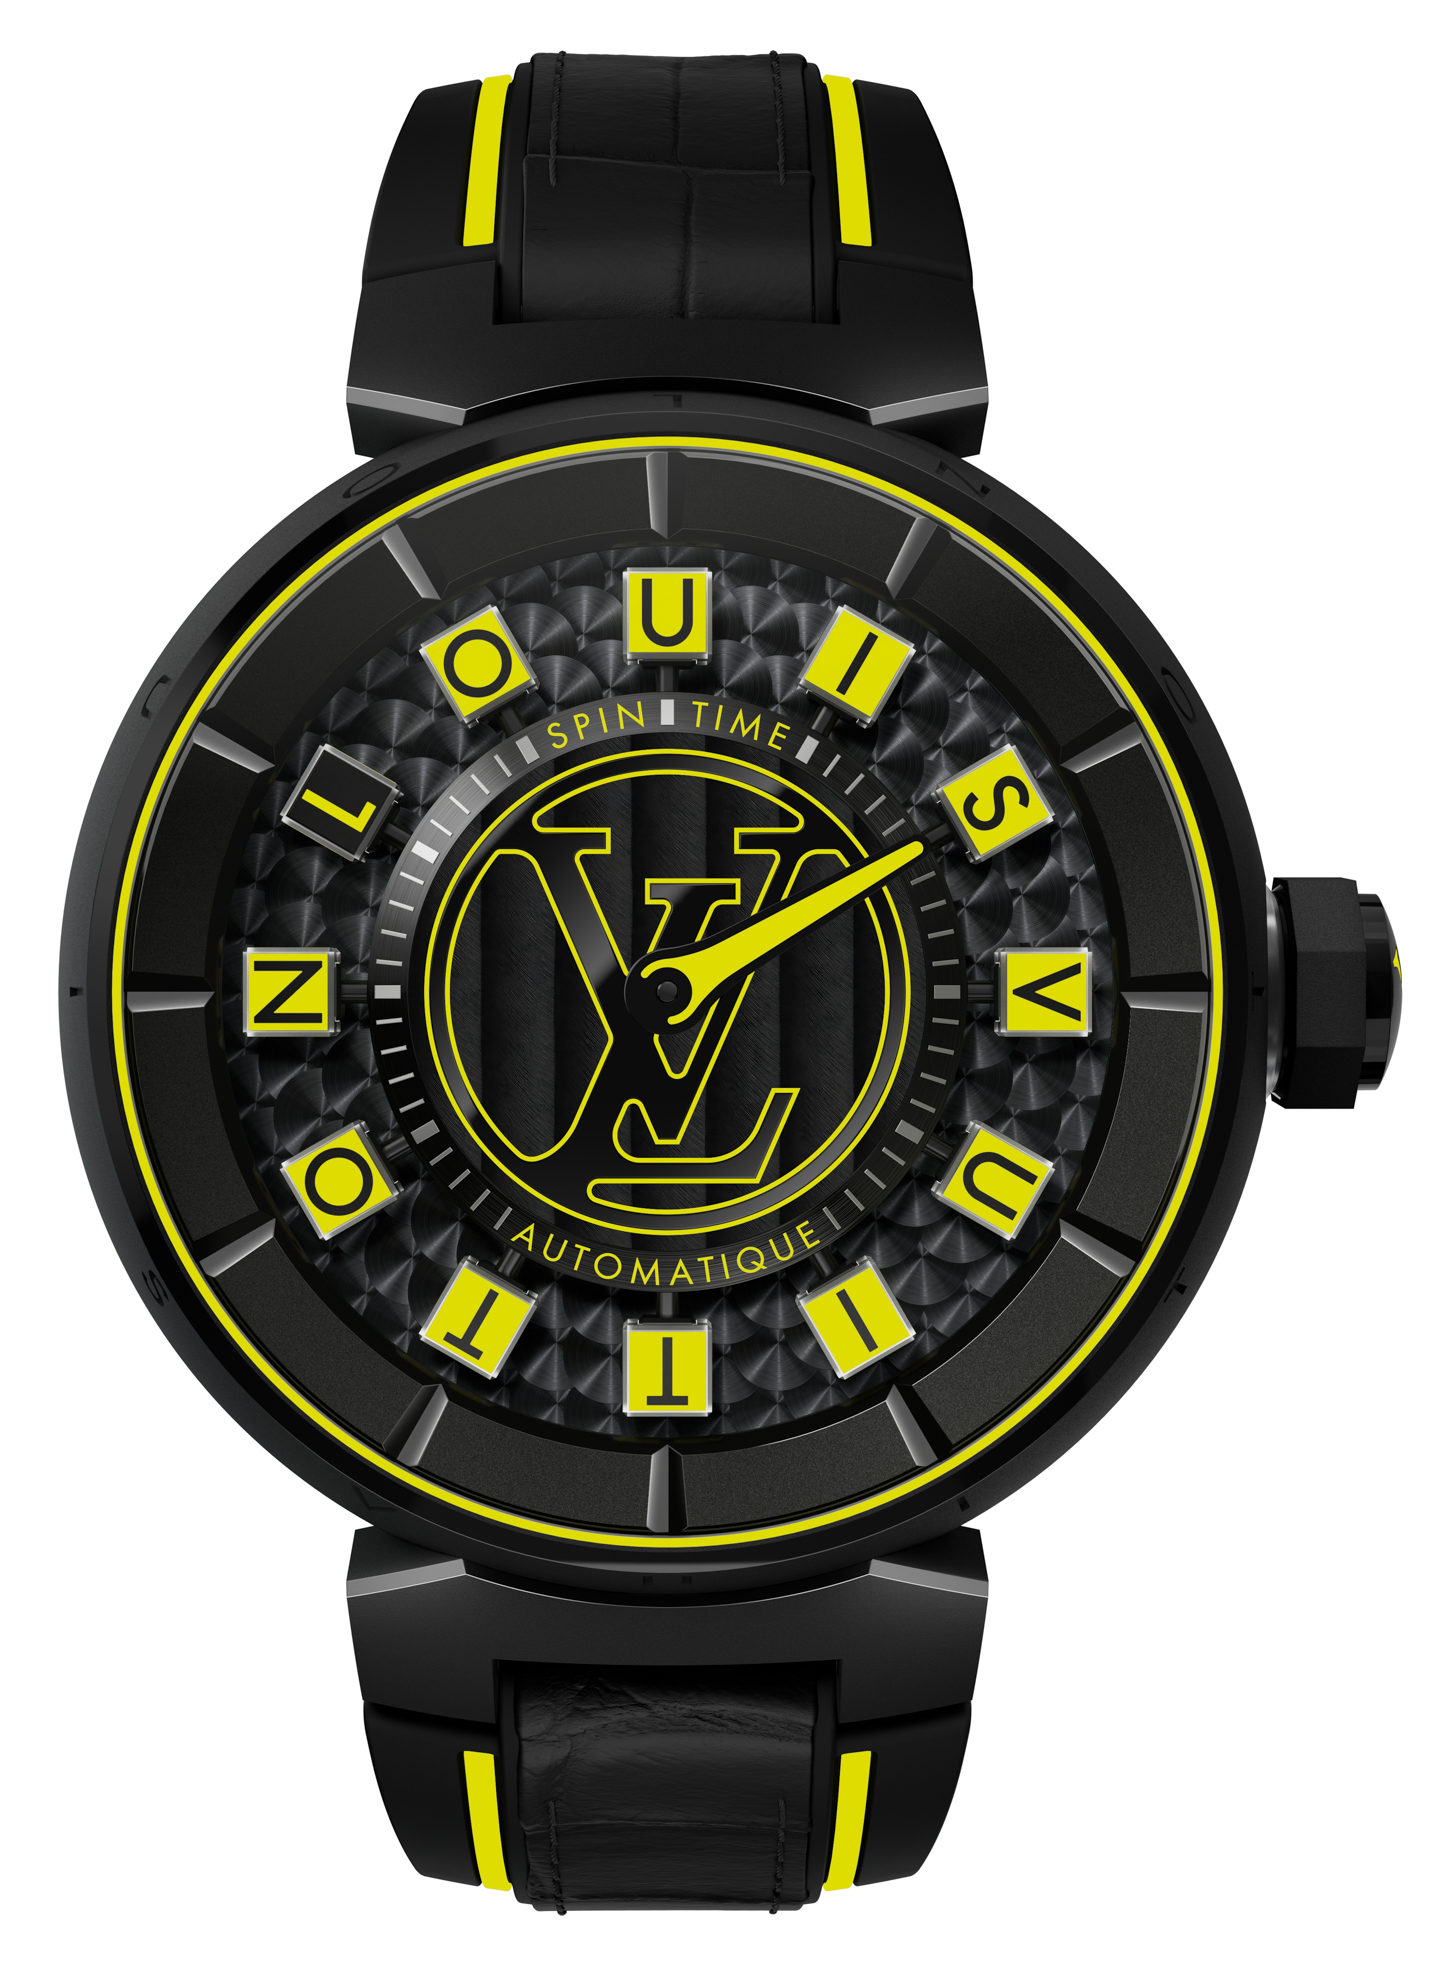 Introducing The Louis Vuitton Tambour Spin Time Air Quantum and Tambour  Slim Vivienne Jumping Hours - Revolution Watch